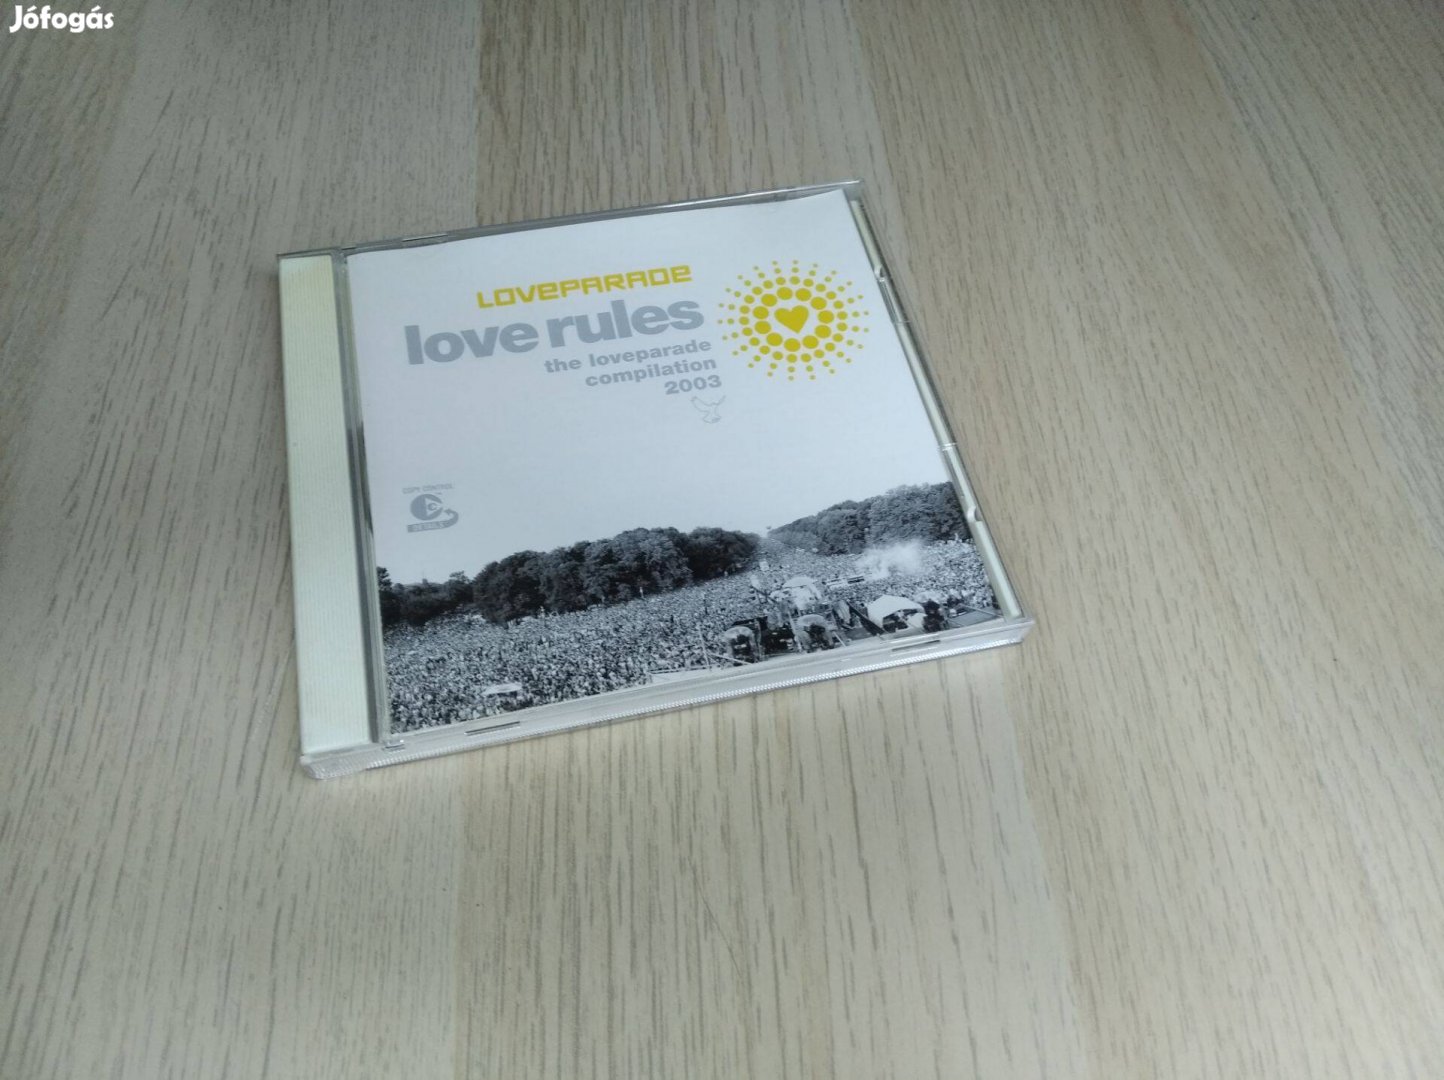 Love Rules - The Loveparade Compilation 2003 / CD